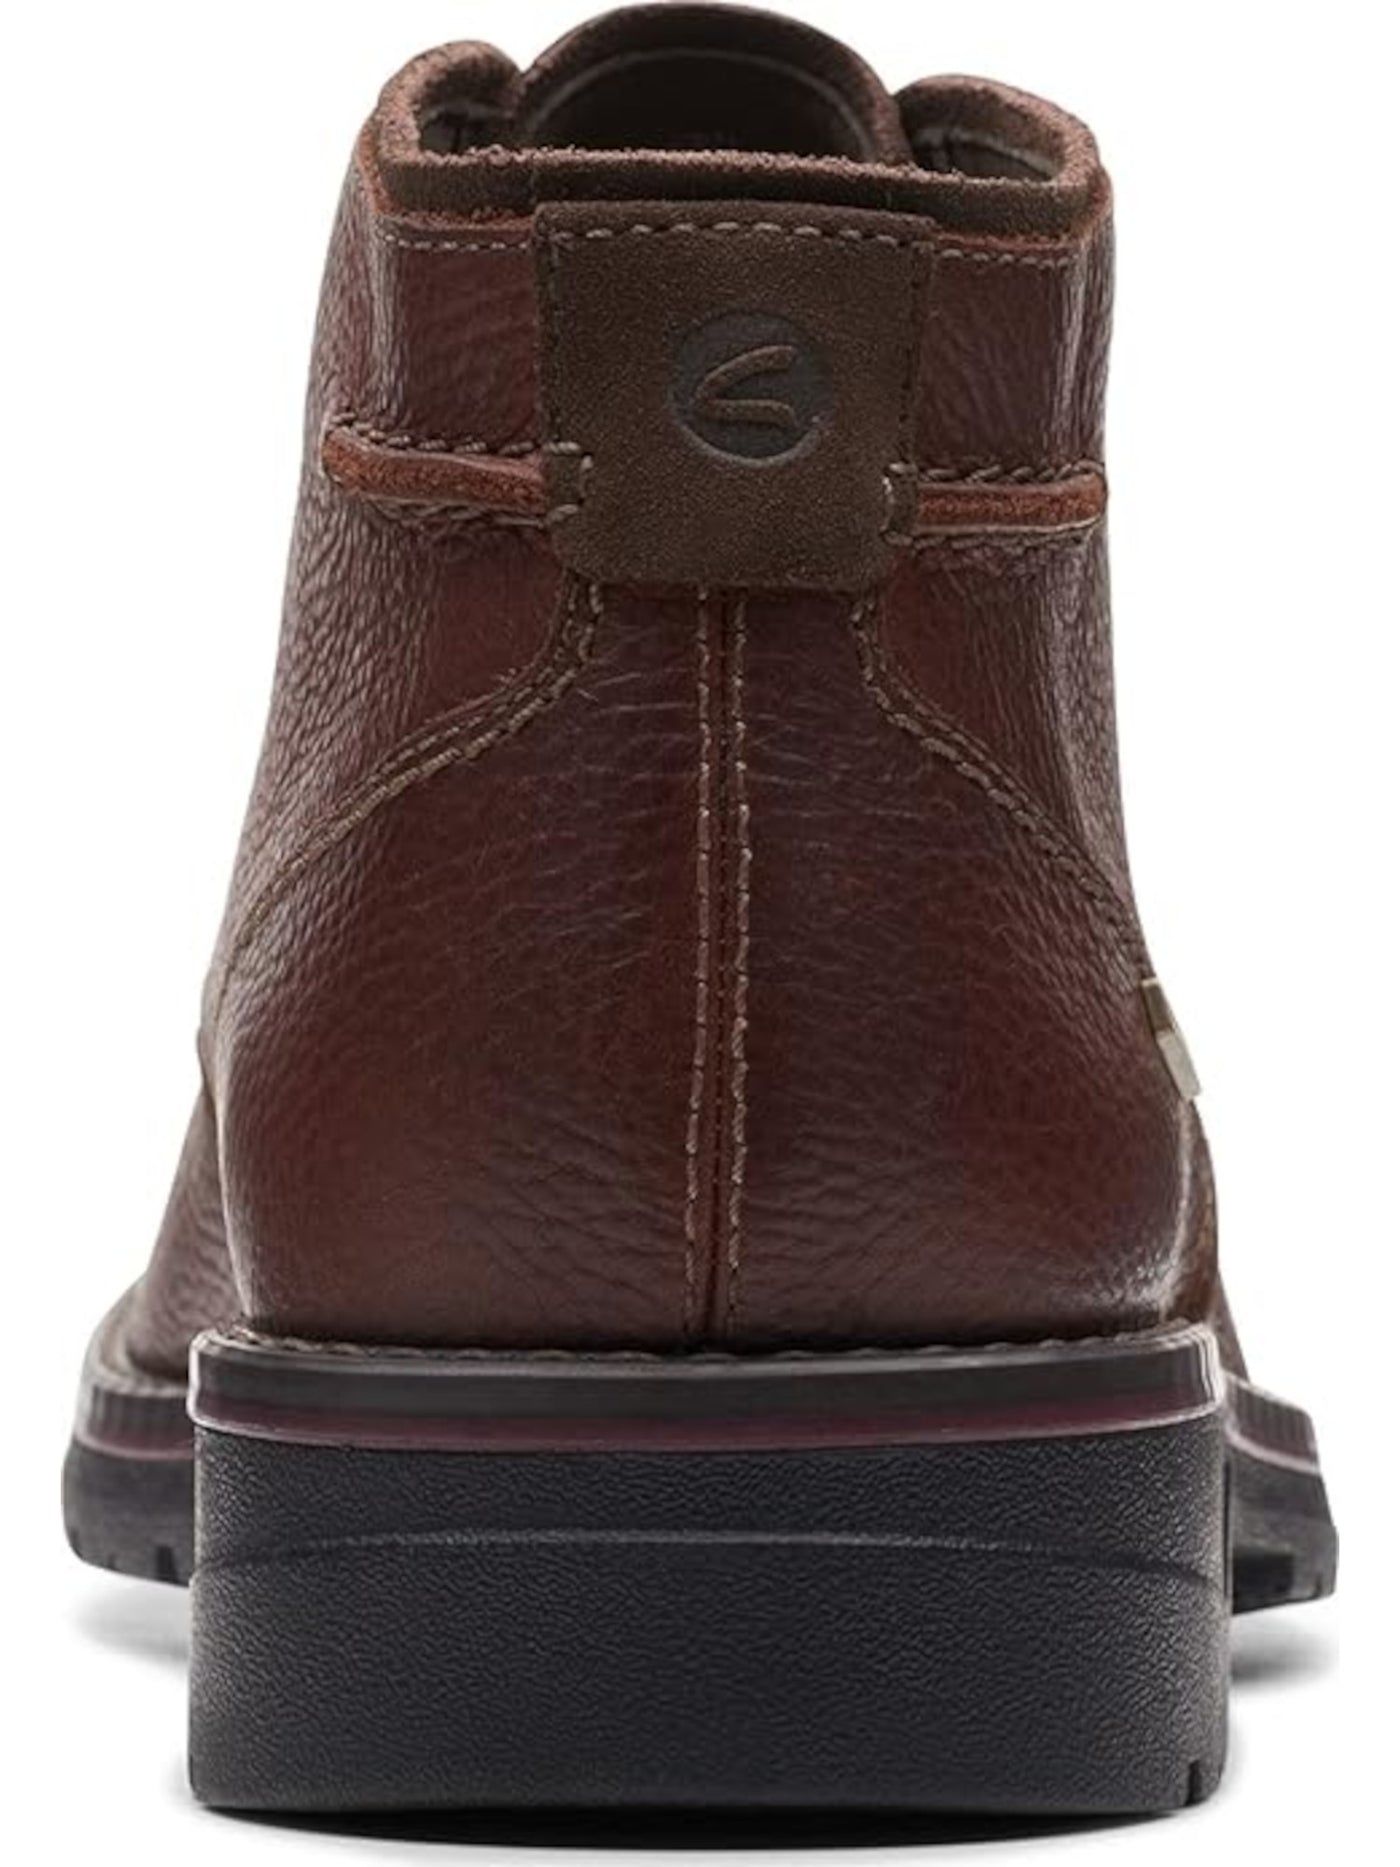 CLARKS COLLECTION Mens Brown Padded Removable Insole Water Resistant Morris Peak Round Toe Block Heel Lace-Up Leather Chukka Boots 9 M